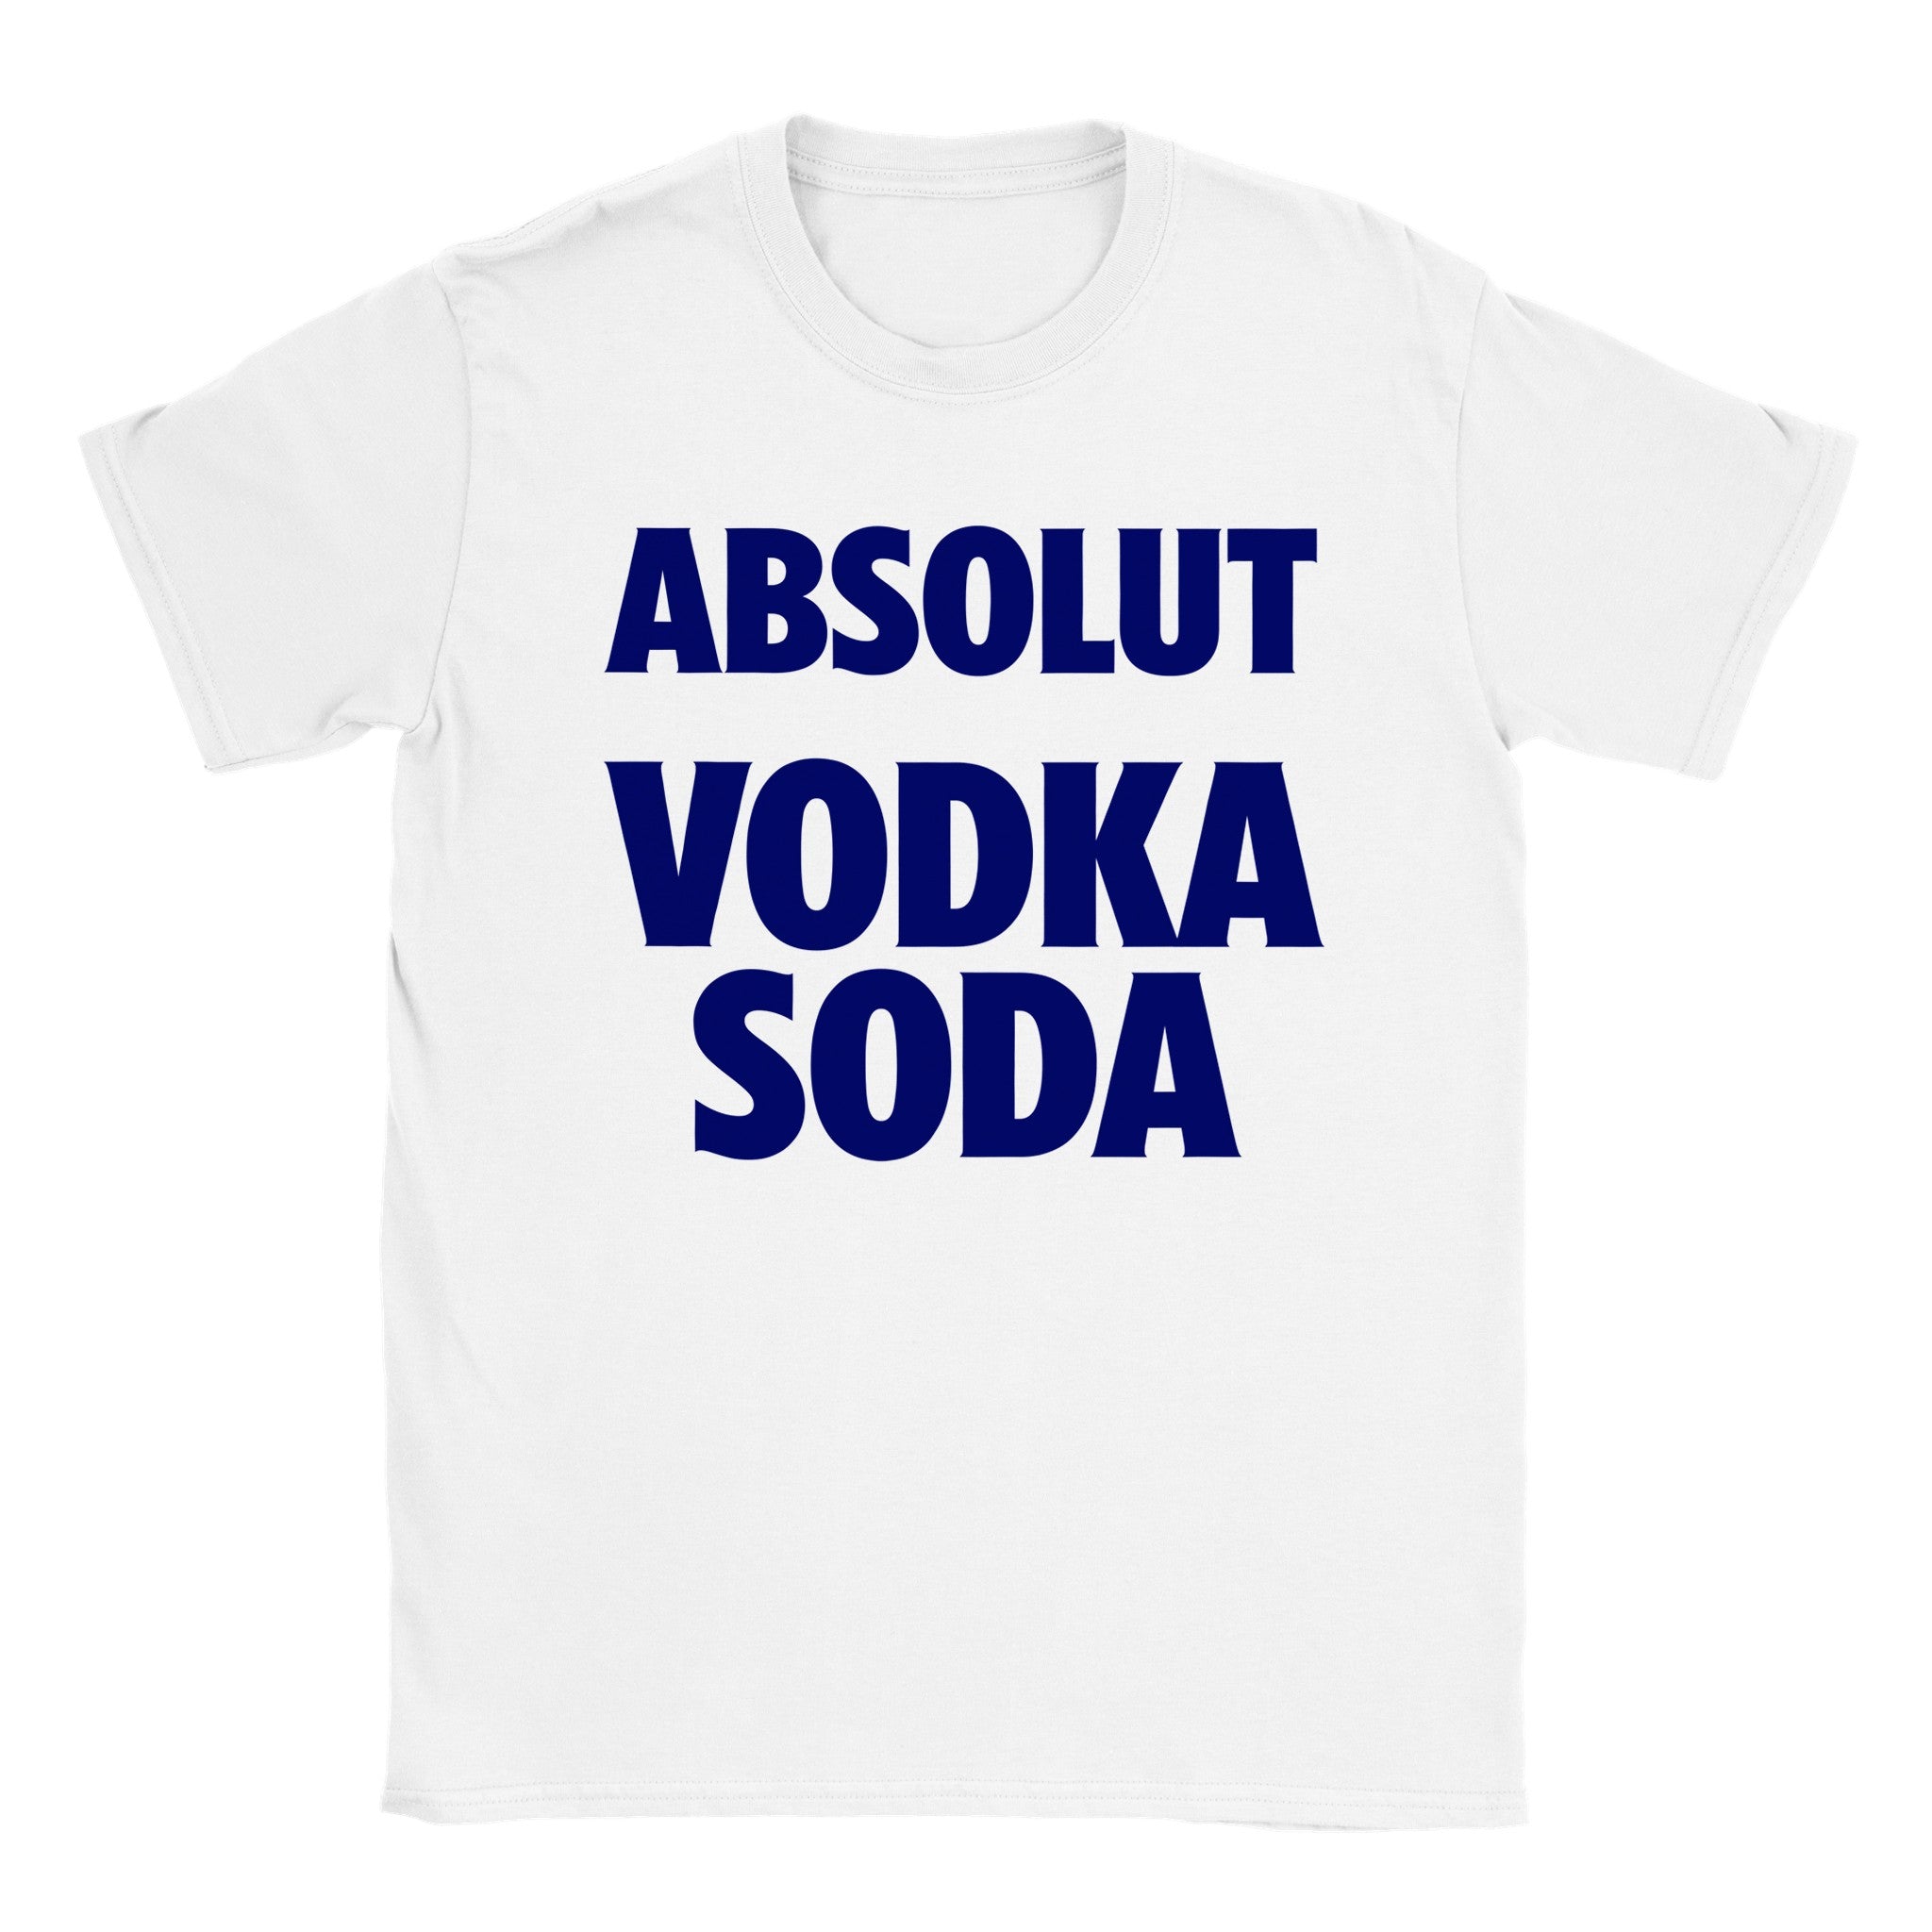 https://creationsbychrisandcarlos.store/products/absolut-logo-classic-unisex-crewneck-t-shirt